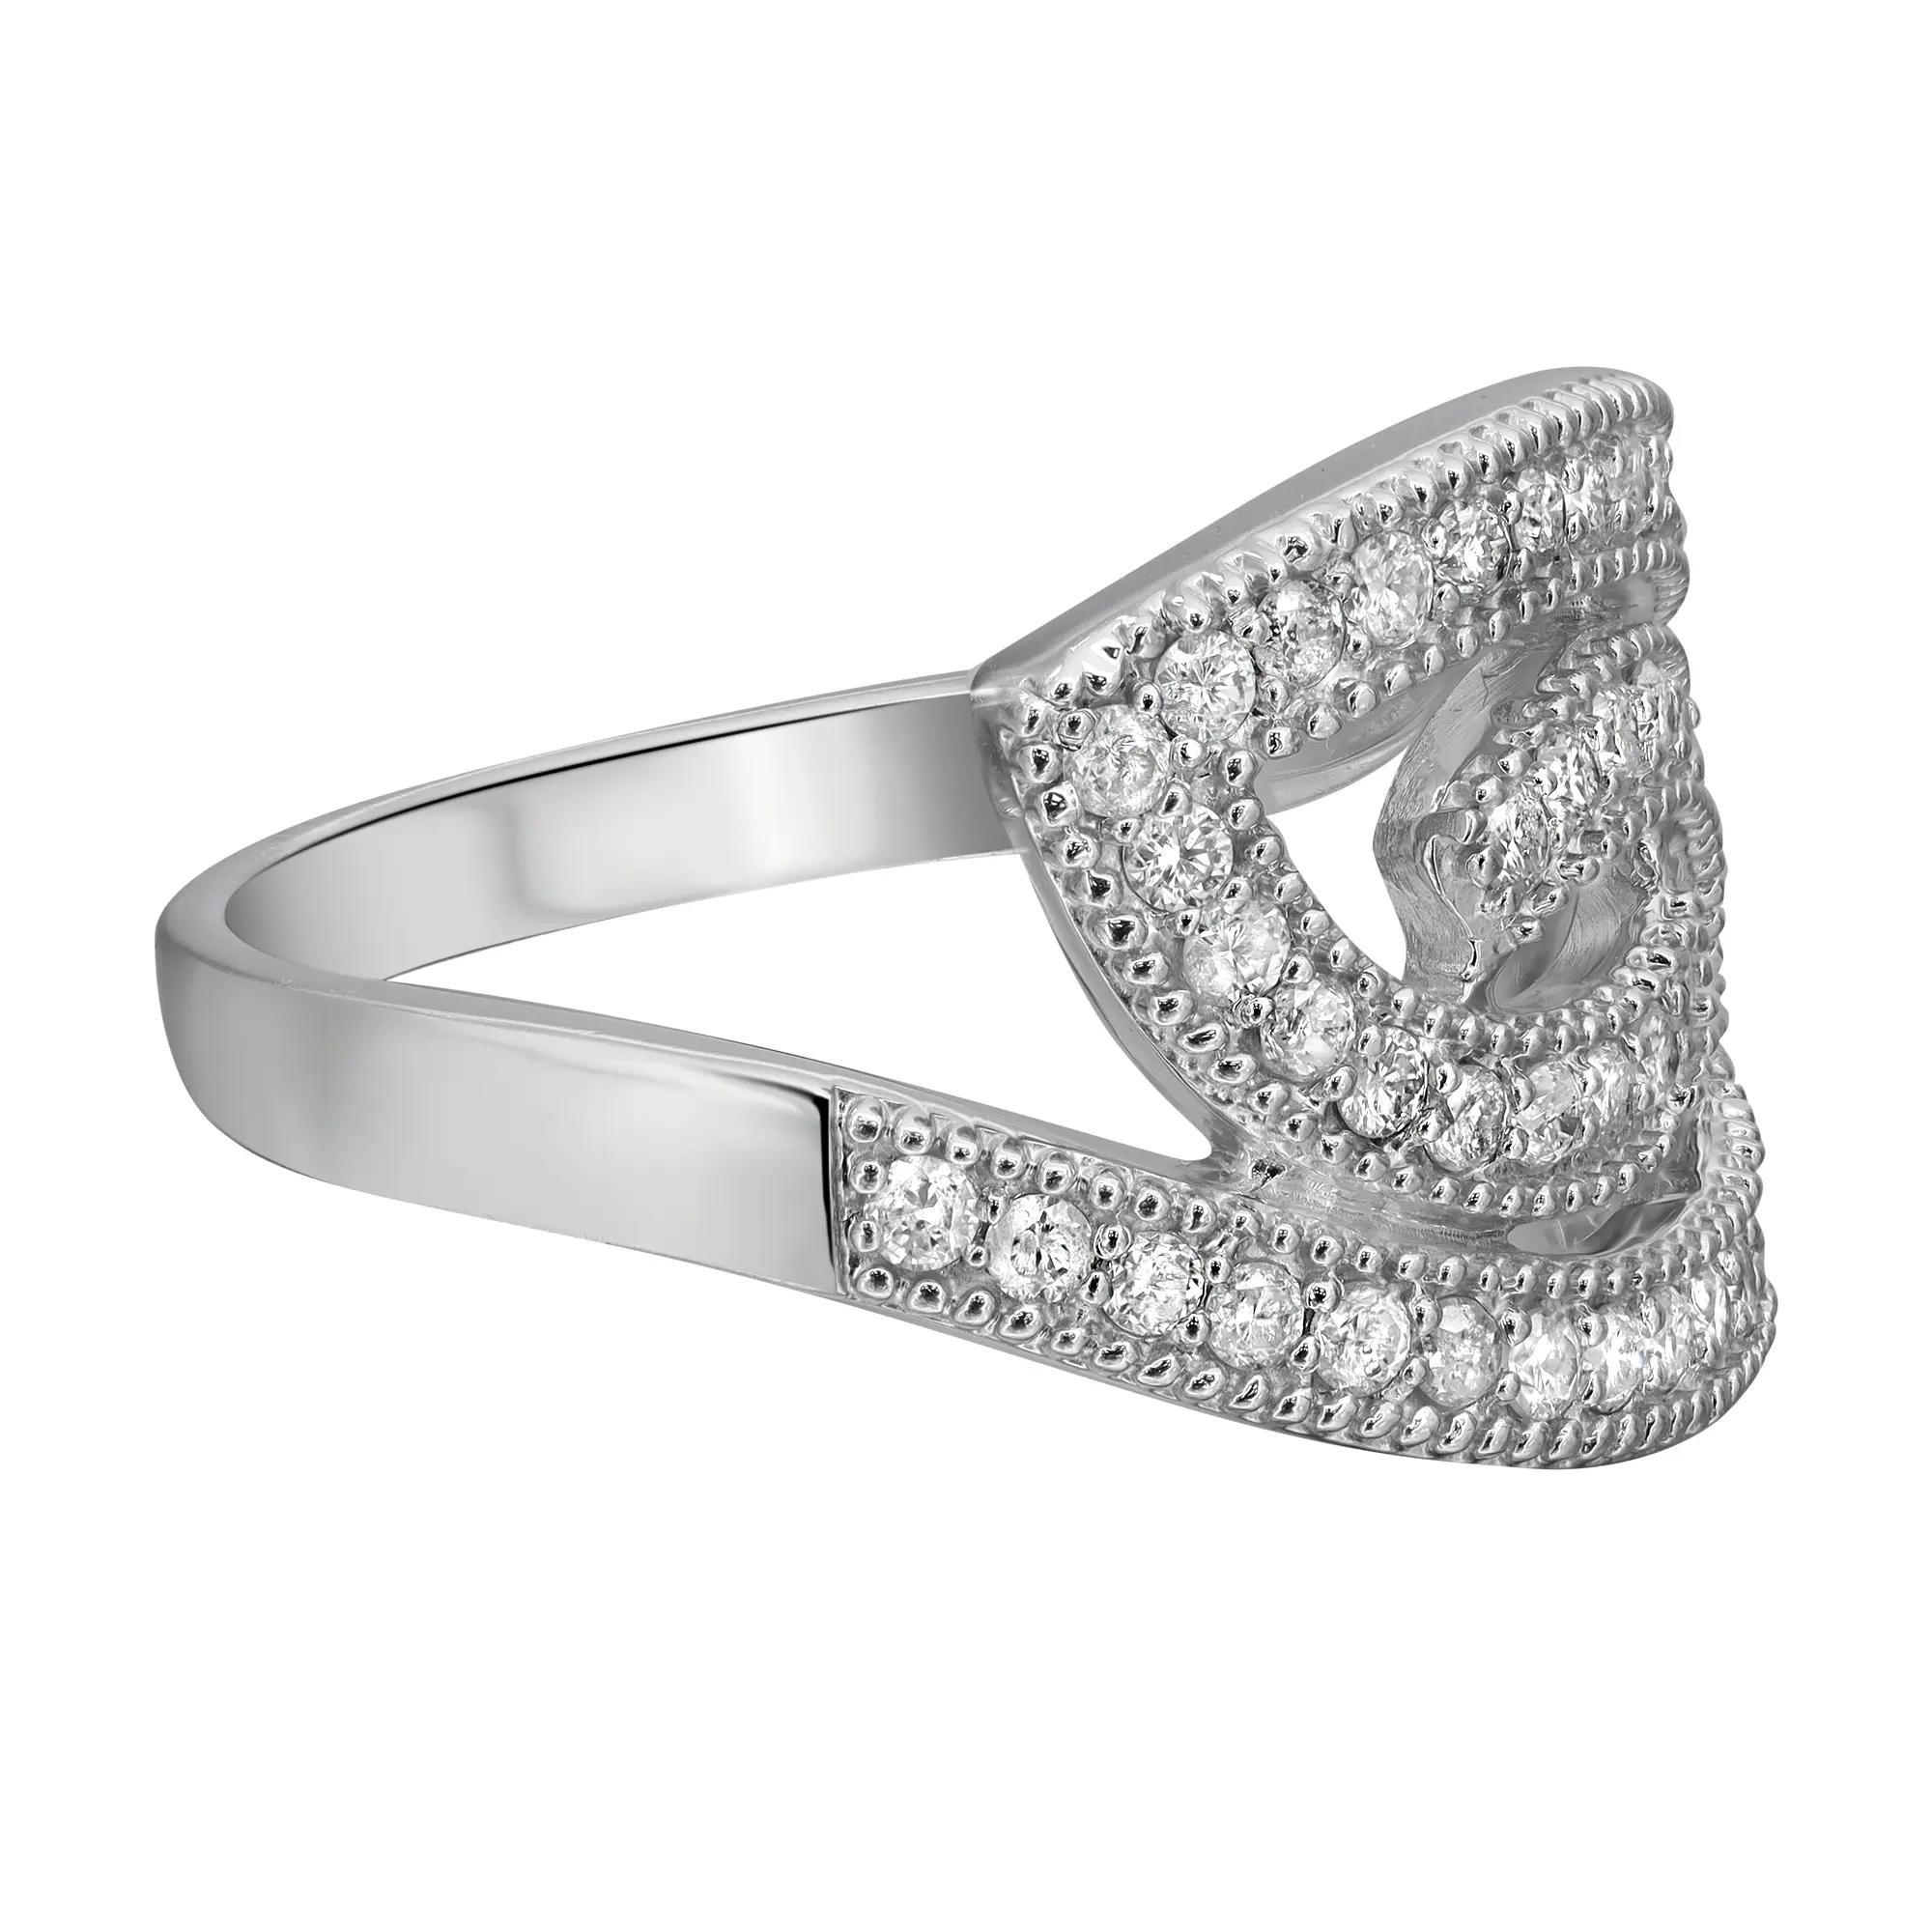 0.74cttw Pave Set Round Cut Diamond Ladies Cocktail Ring 14k White Gold In New Condition For Sale In New York, NY